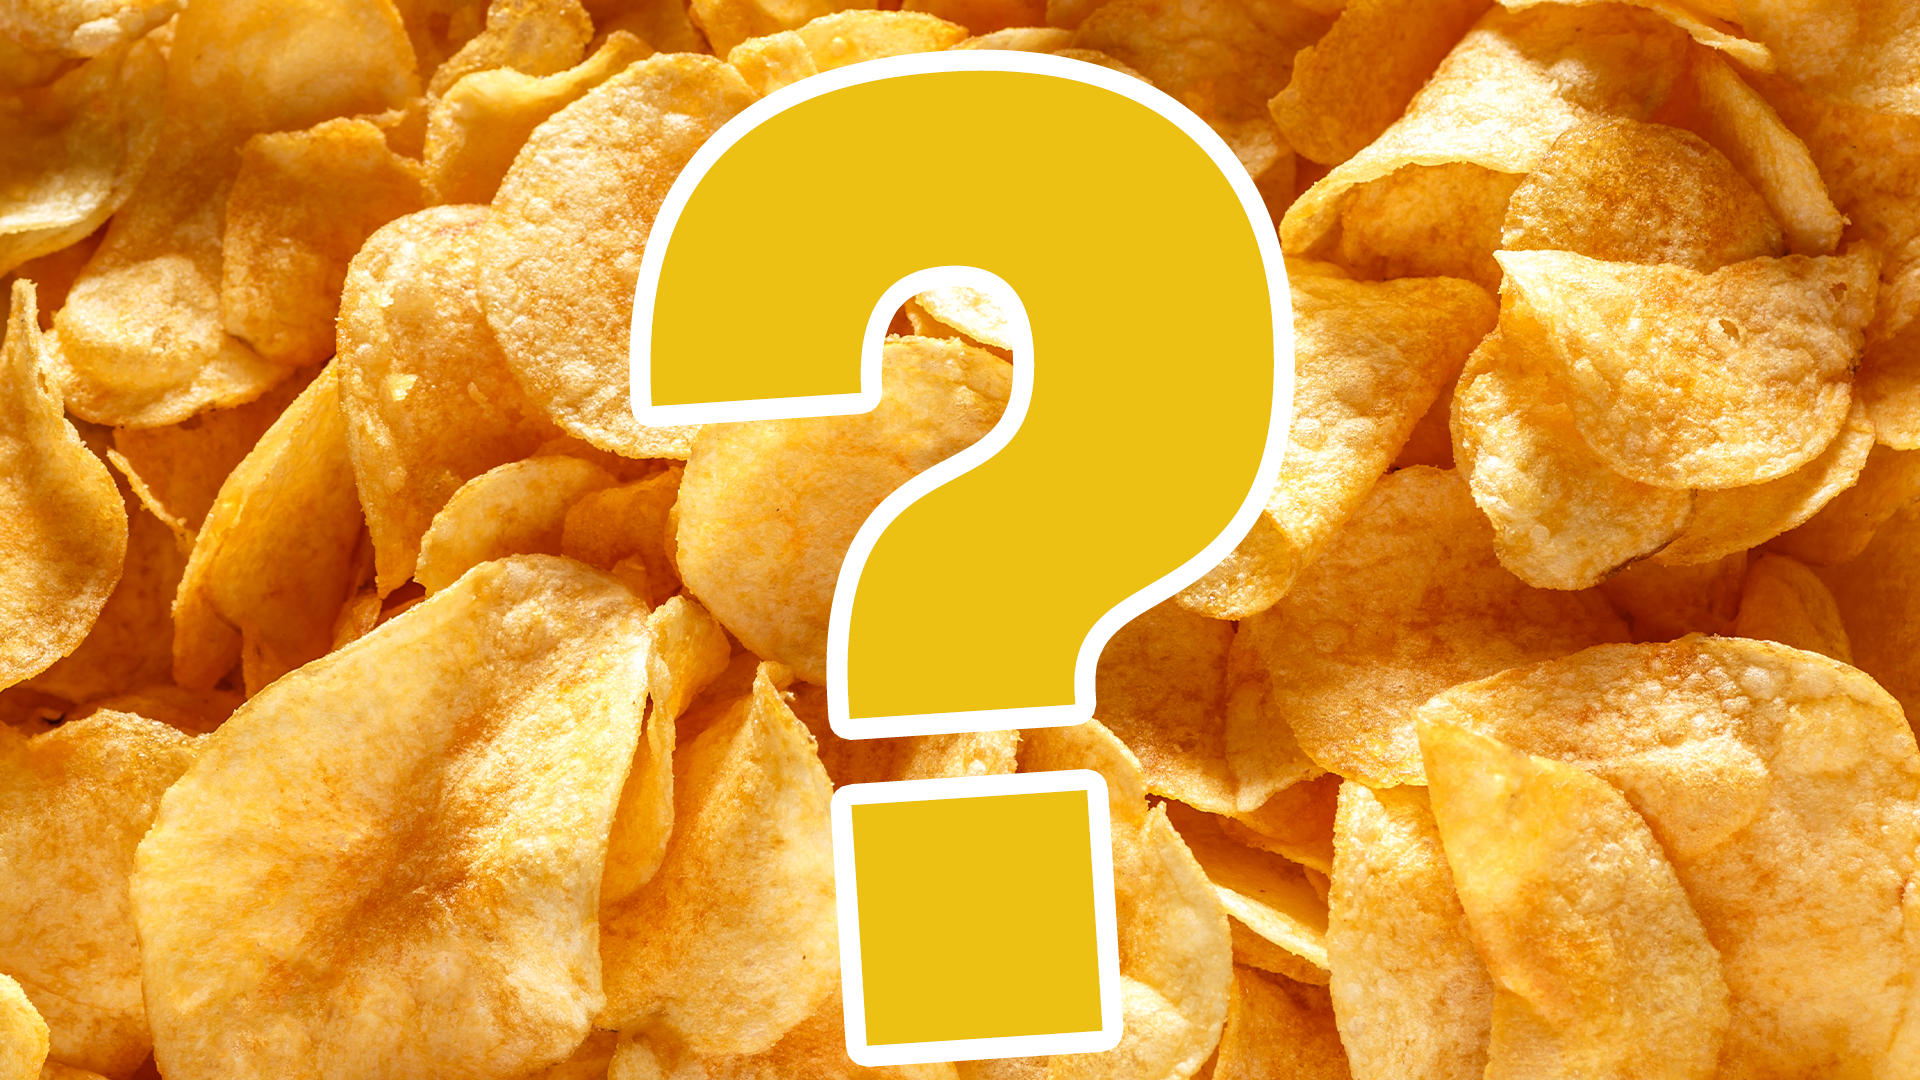 Crisps and question mark